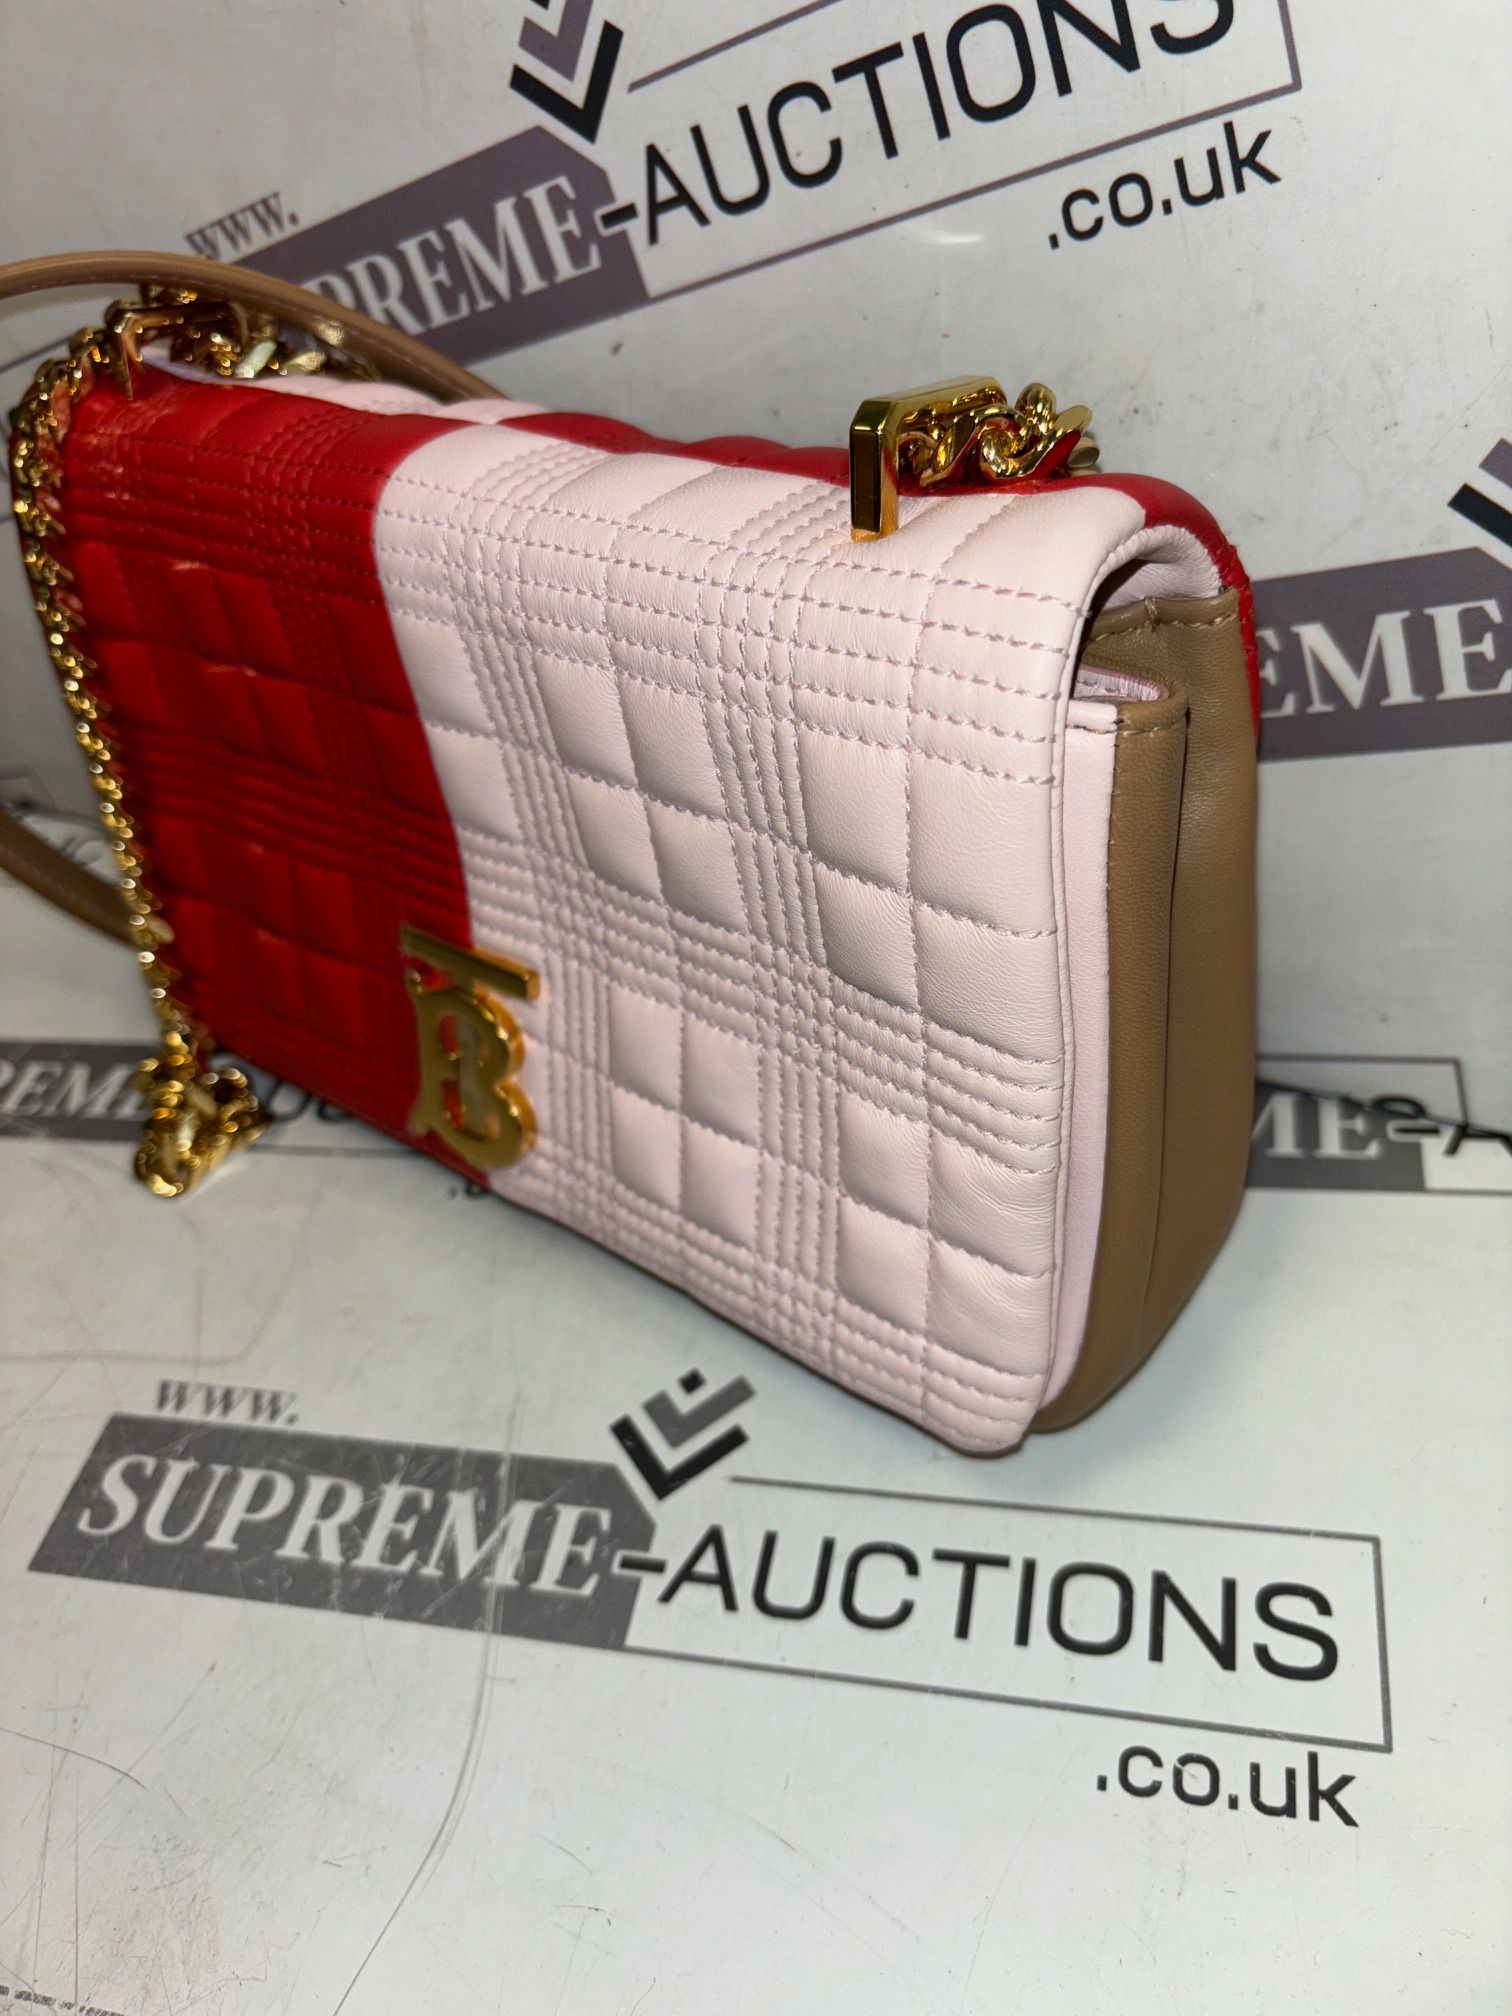 Genuine Burberry Quilted Tri-Tone Lola Bag- Red/Pink/Camel - Image 4 of 9